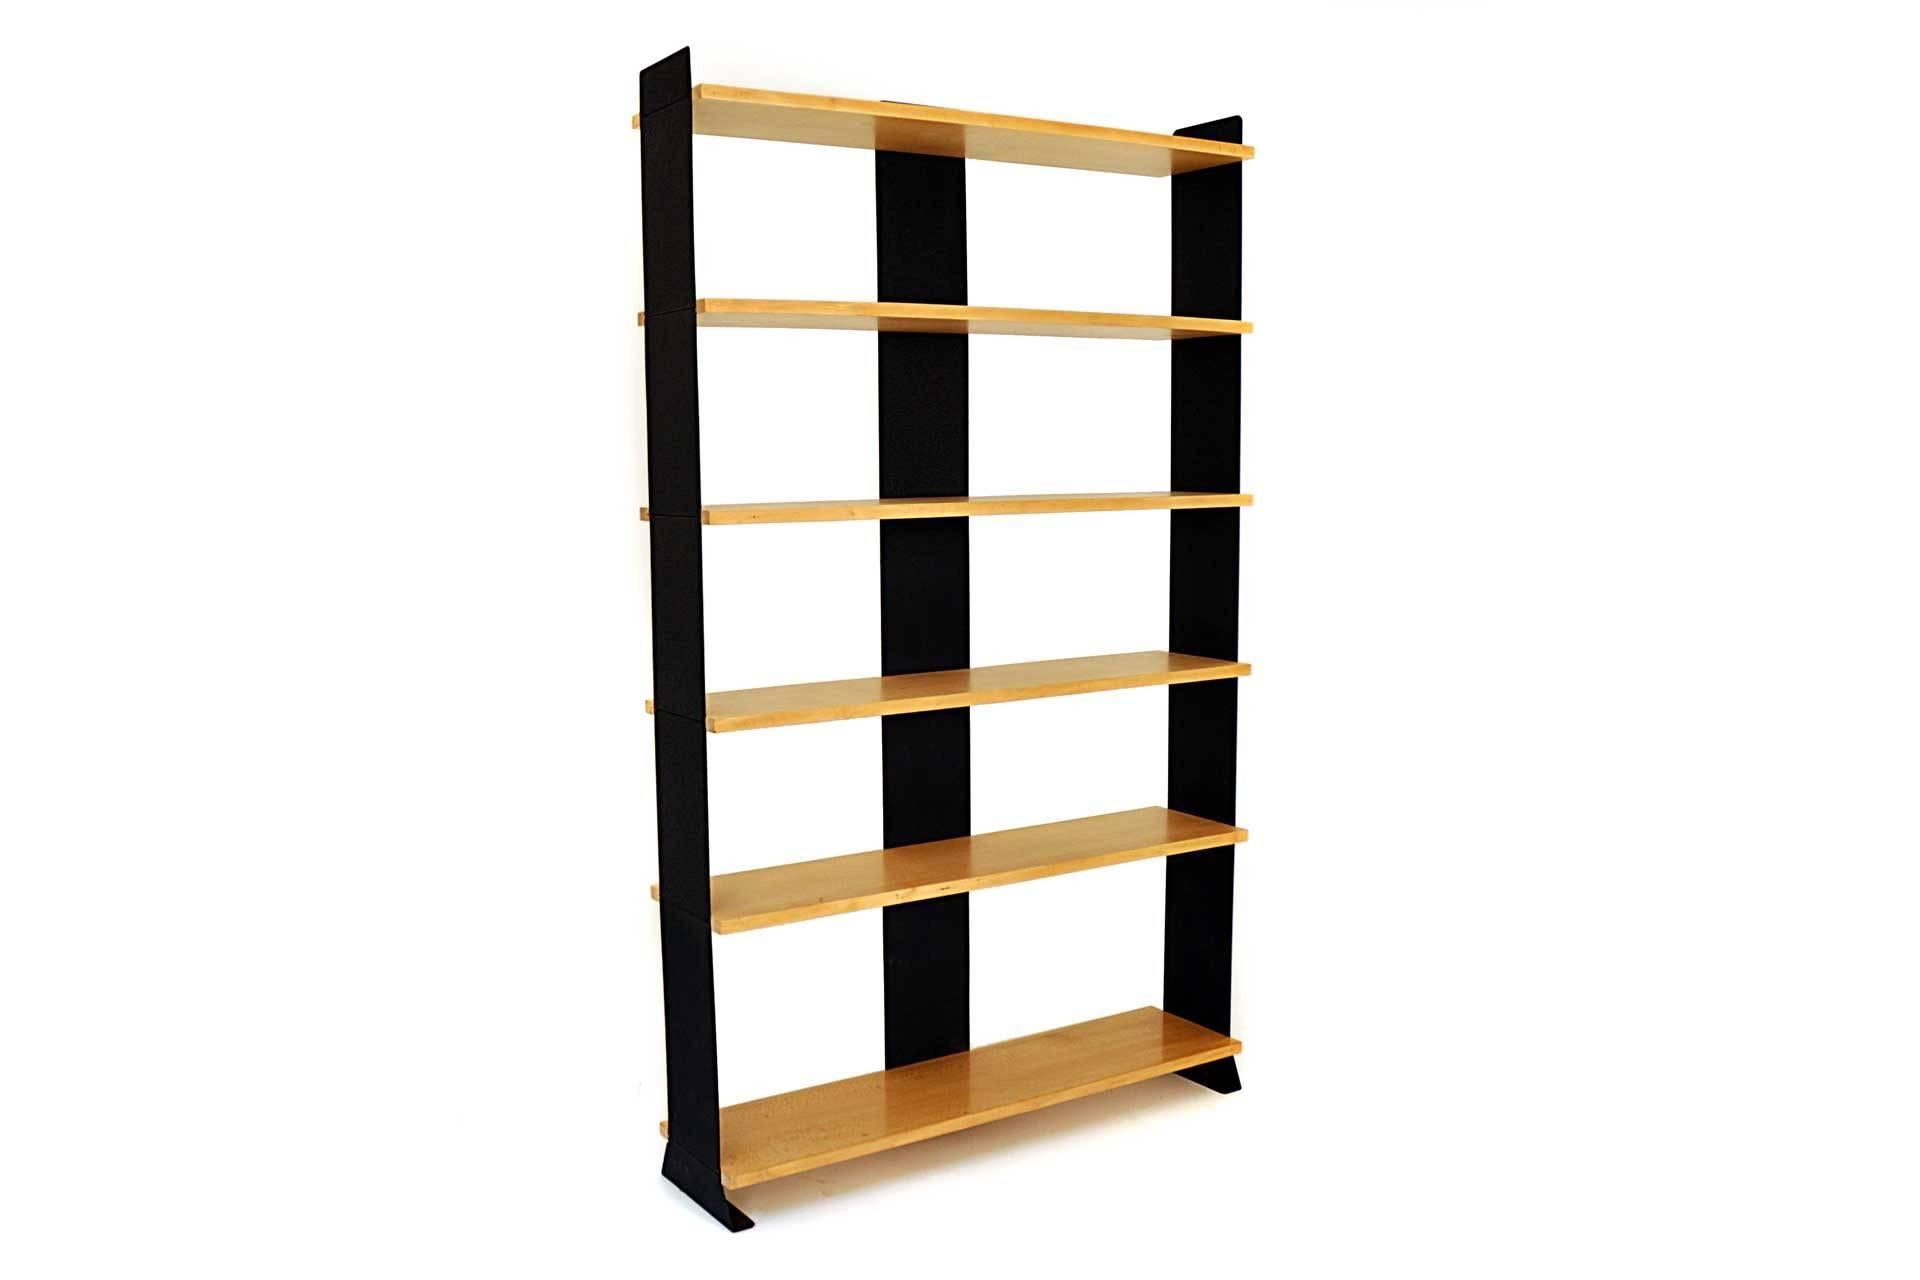 This bookshelf was designed by Wilhelm Kienzle and manufactured in 1950. The model name is 132 